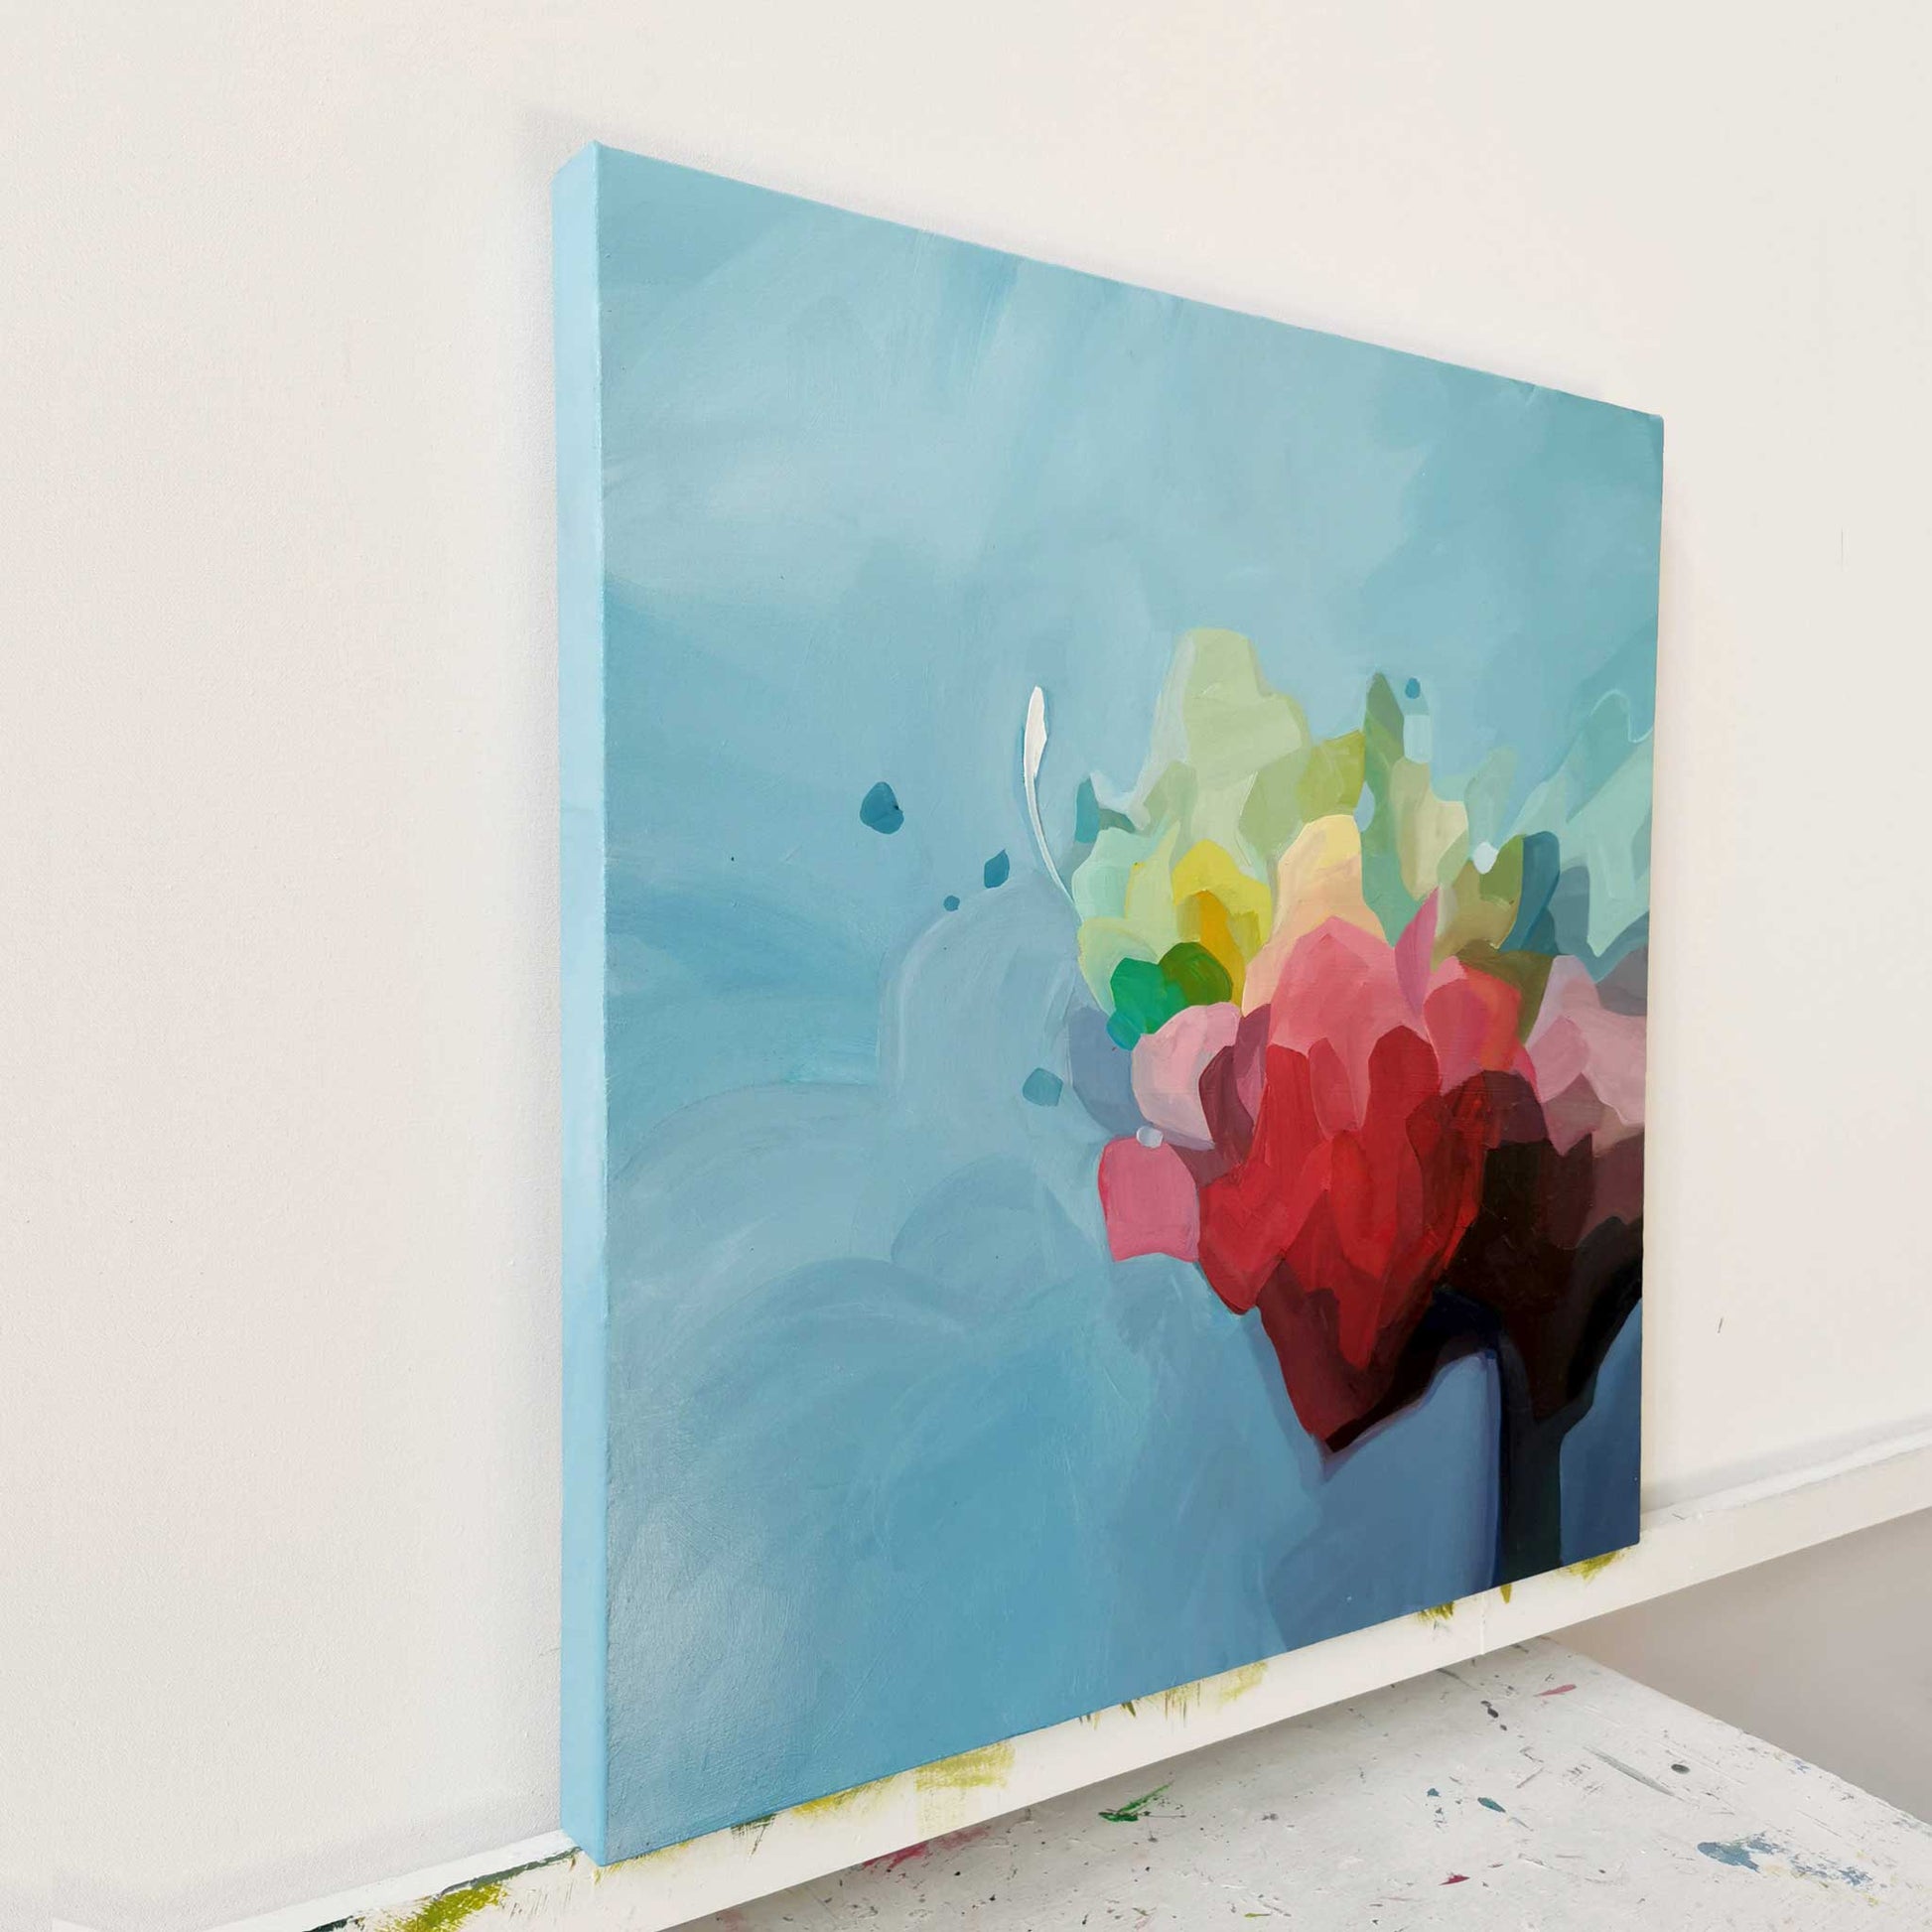 sky blue abstract acrylic painting on canvas in studio by Canadian artist Susannah Bleasby